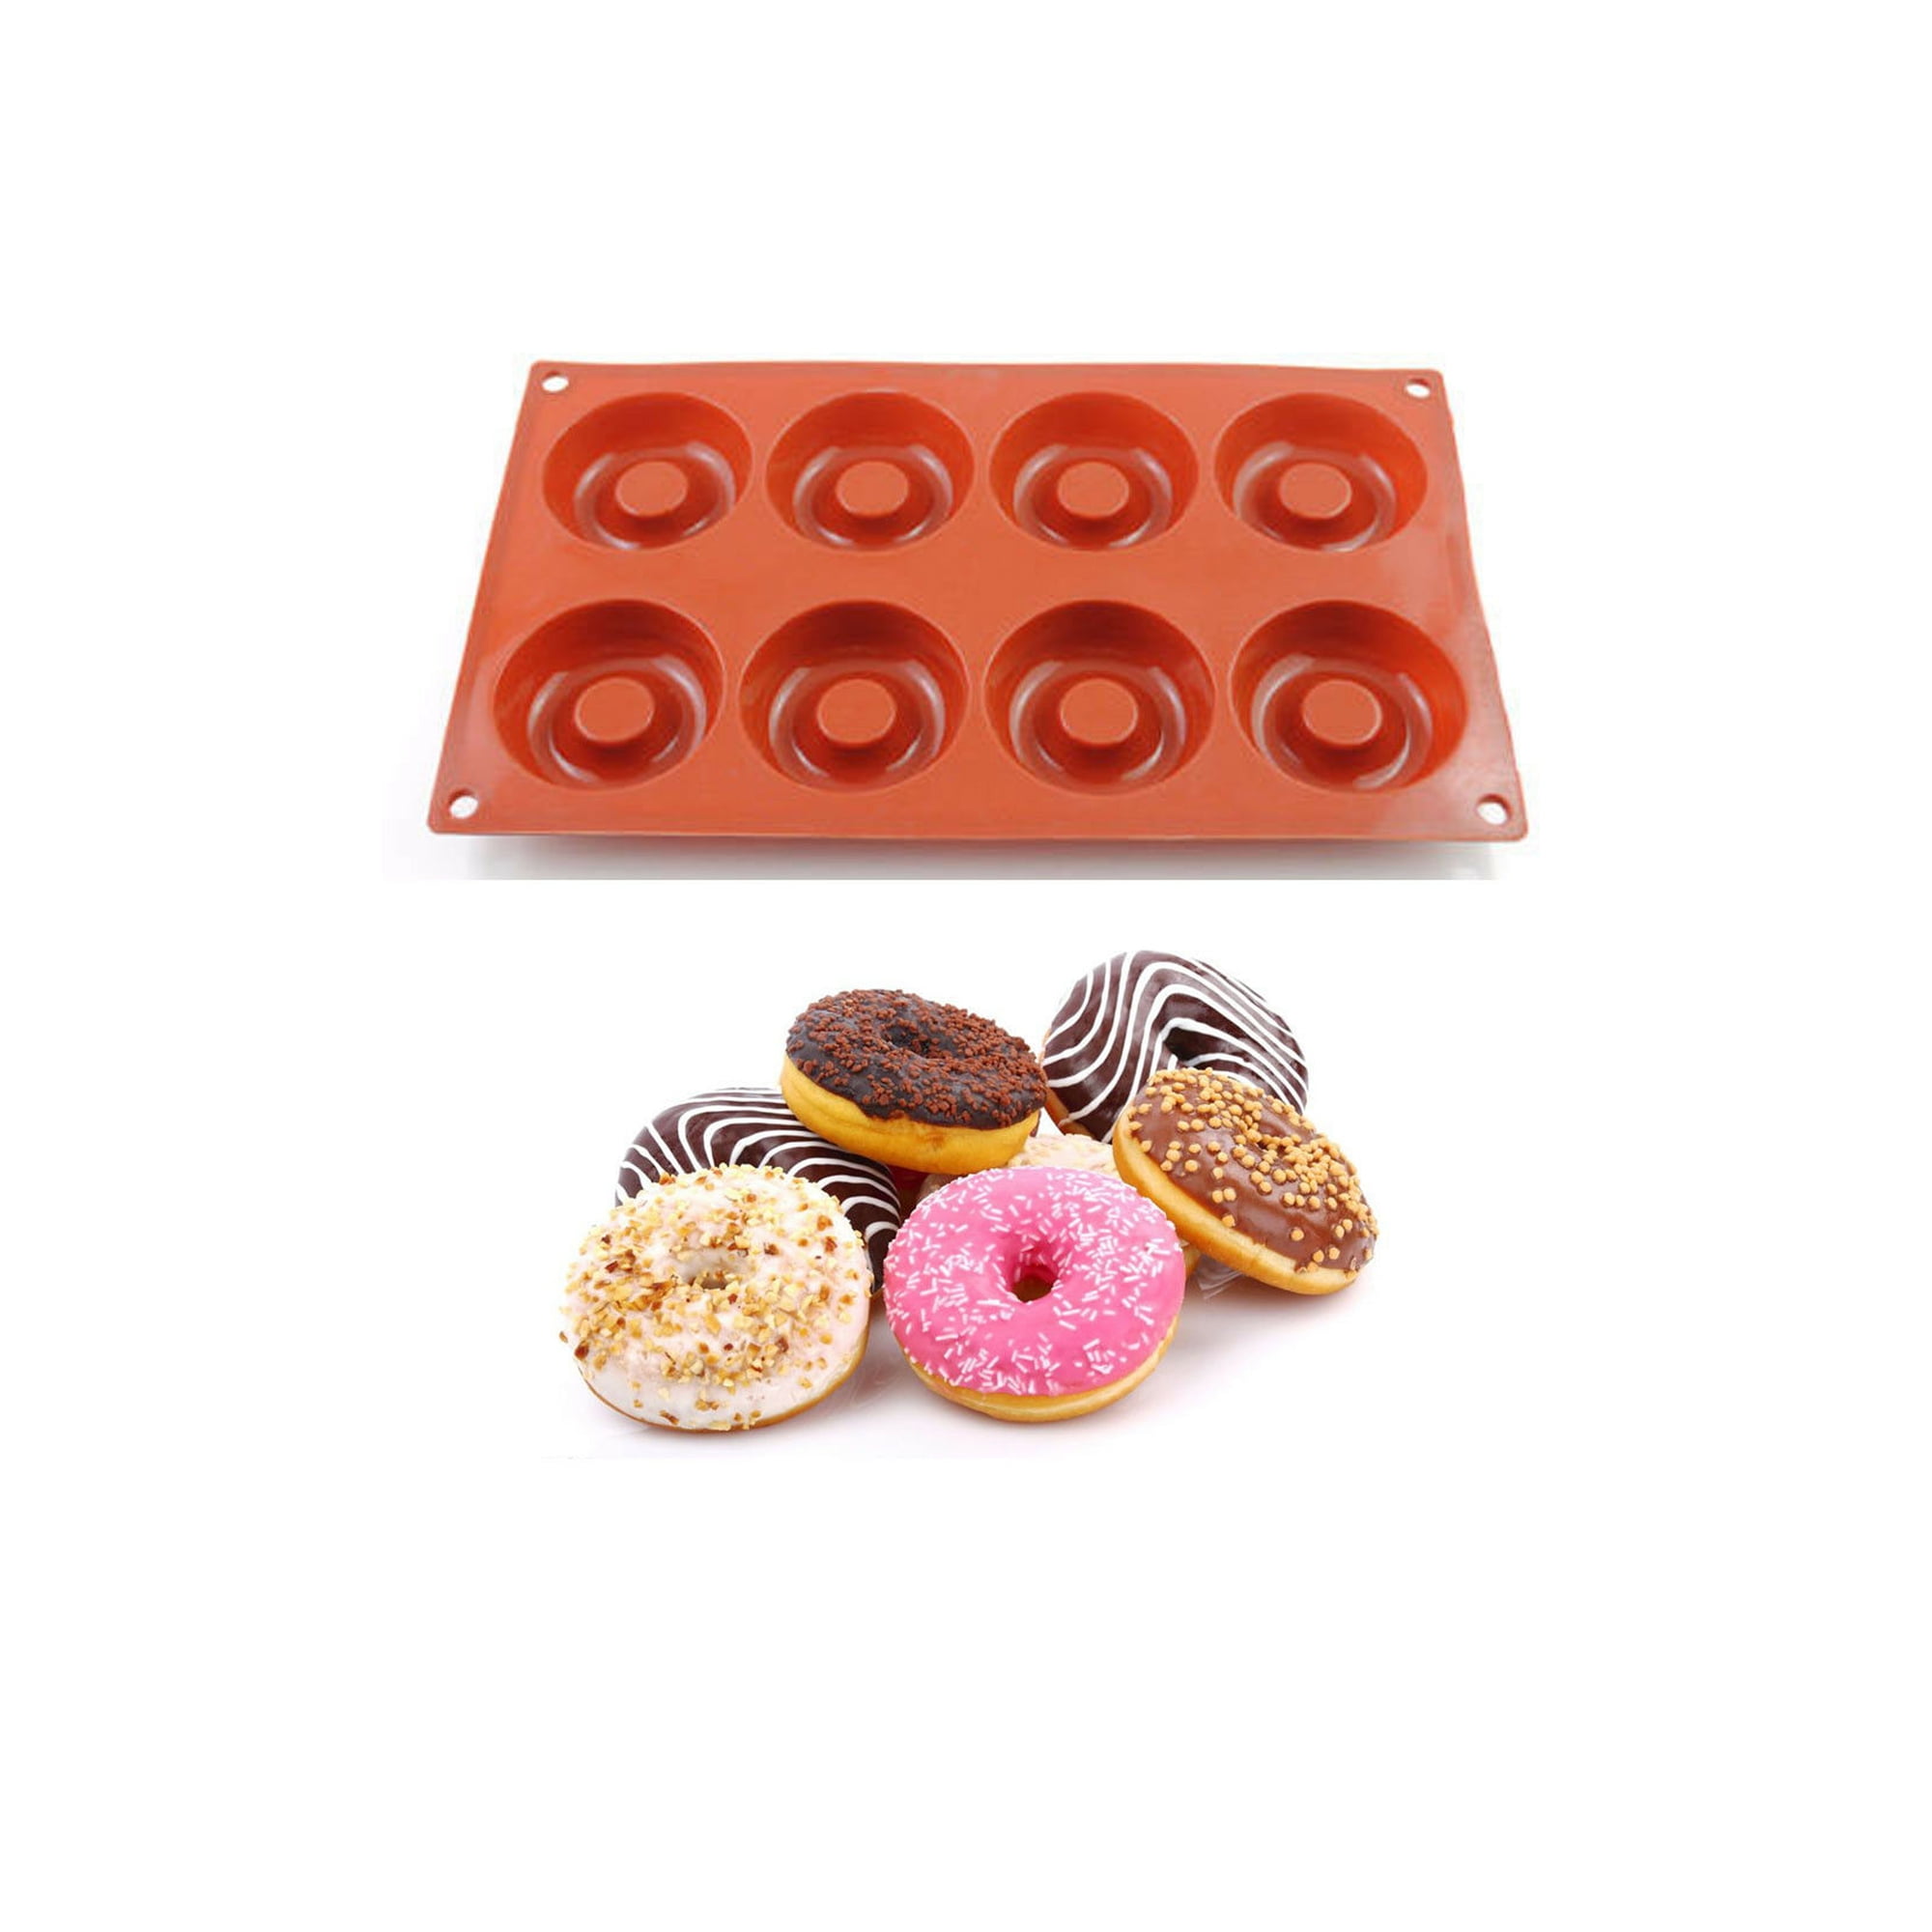 1pcs Silicone Cake Chocolate Donut Cookie Mold Baking Tools 